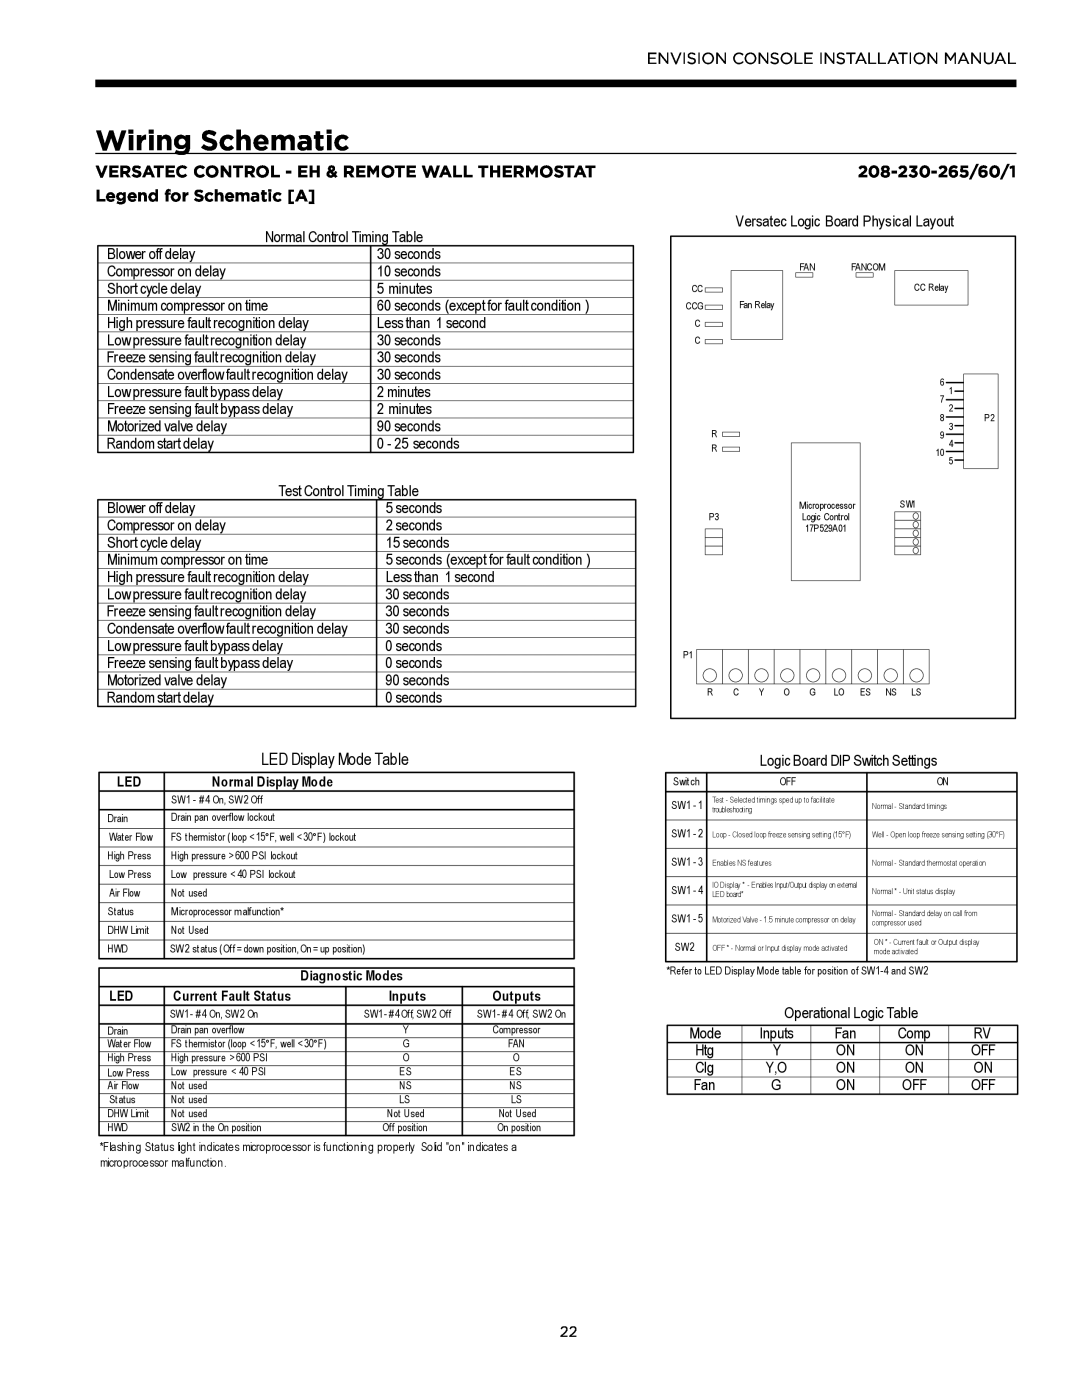 Envision Peripherals IM1609 10, IM1609 08 installation manual Wiring Schematic, 208-230-265/60/1, LED Display Mode Table 